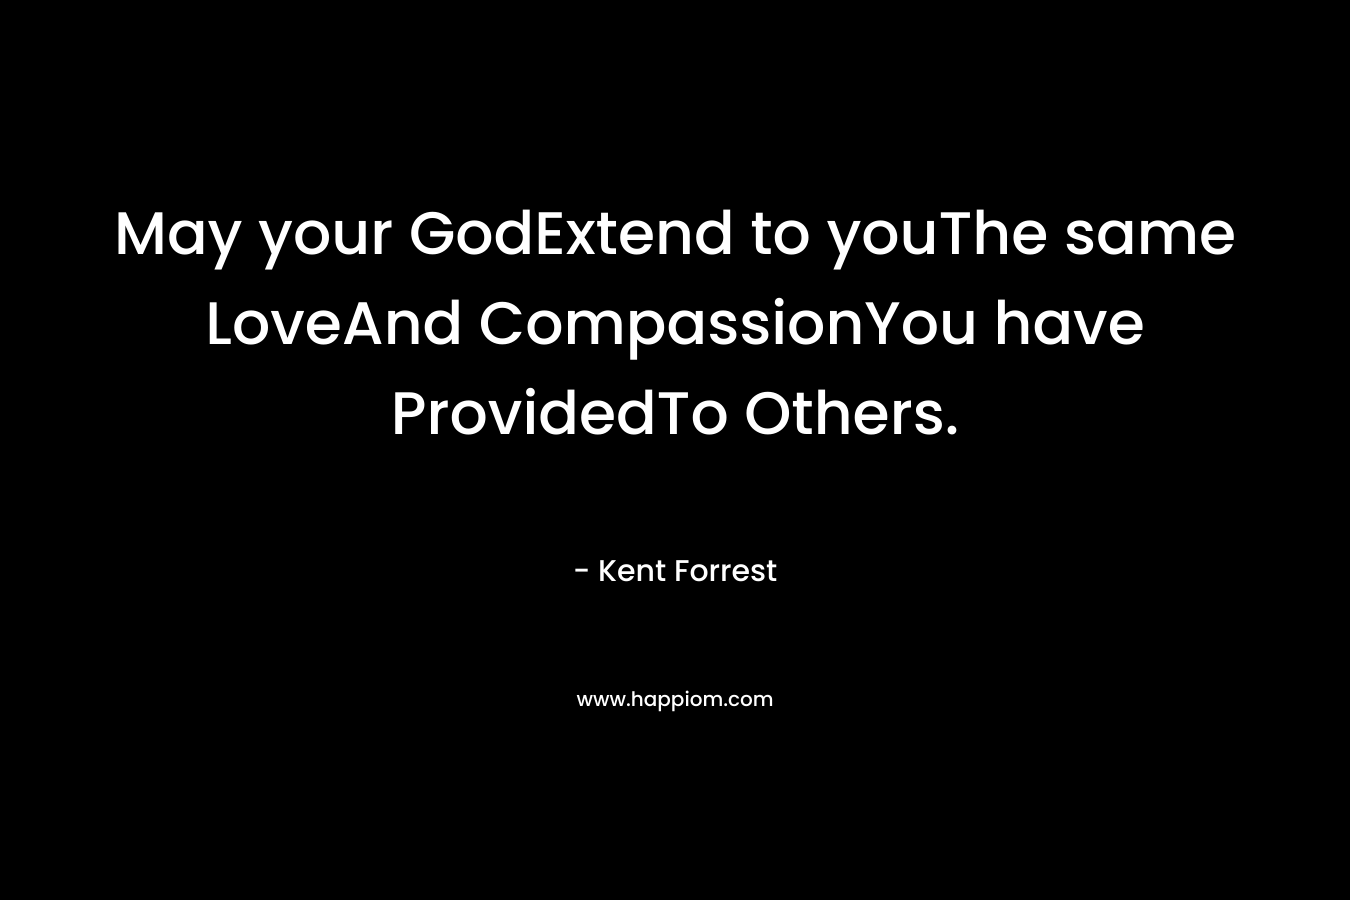 May your GodExtend to youThe same LoveAnd CompassionYou have ProvidedTo Others.